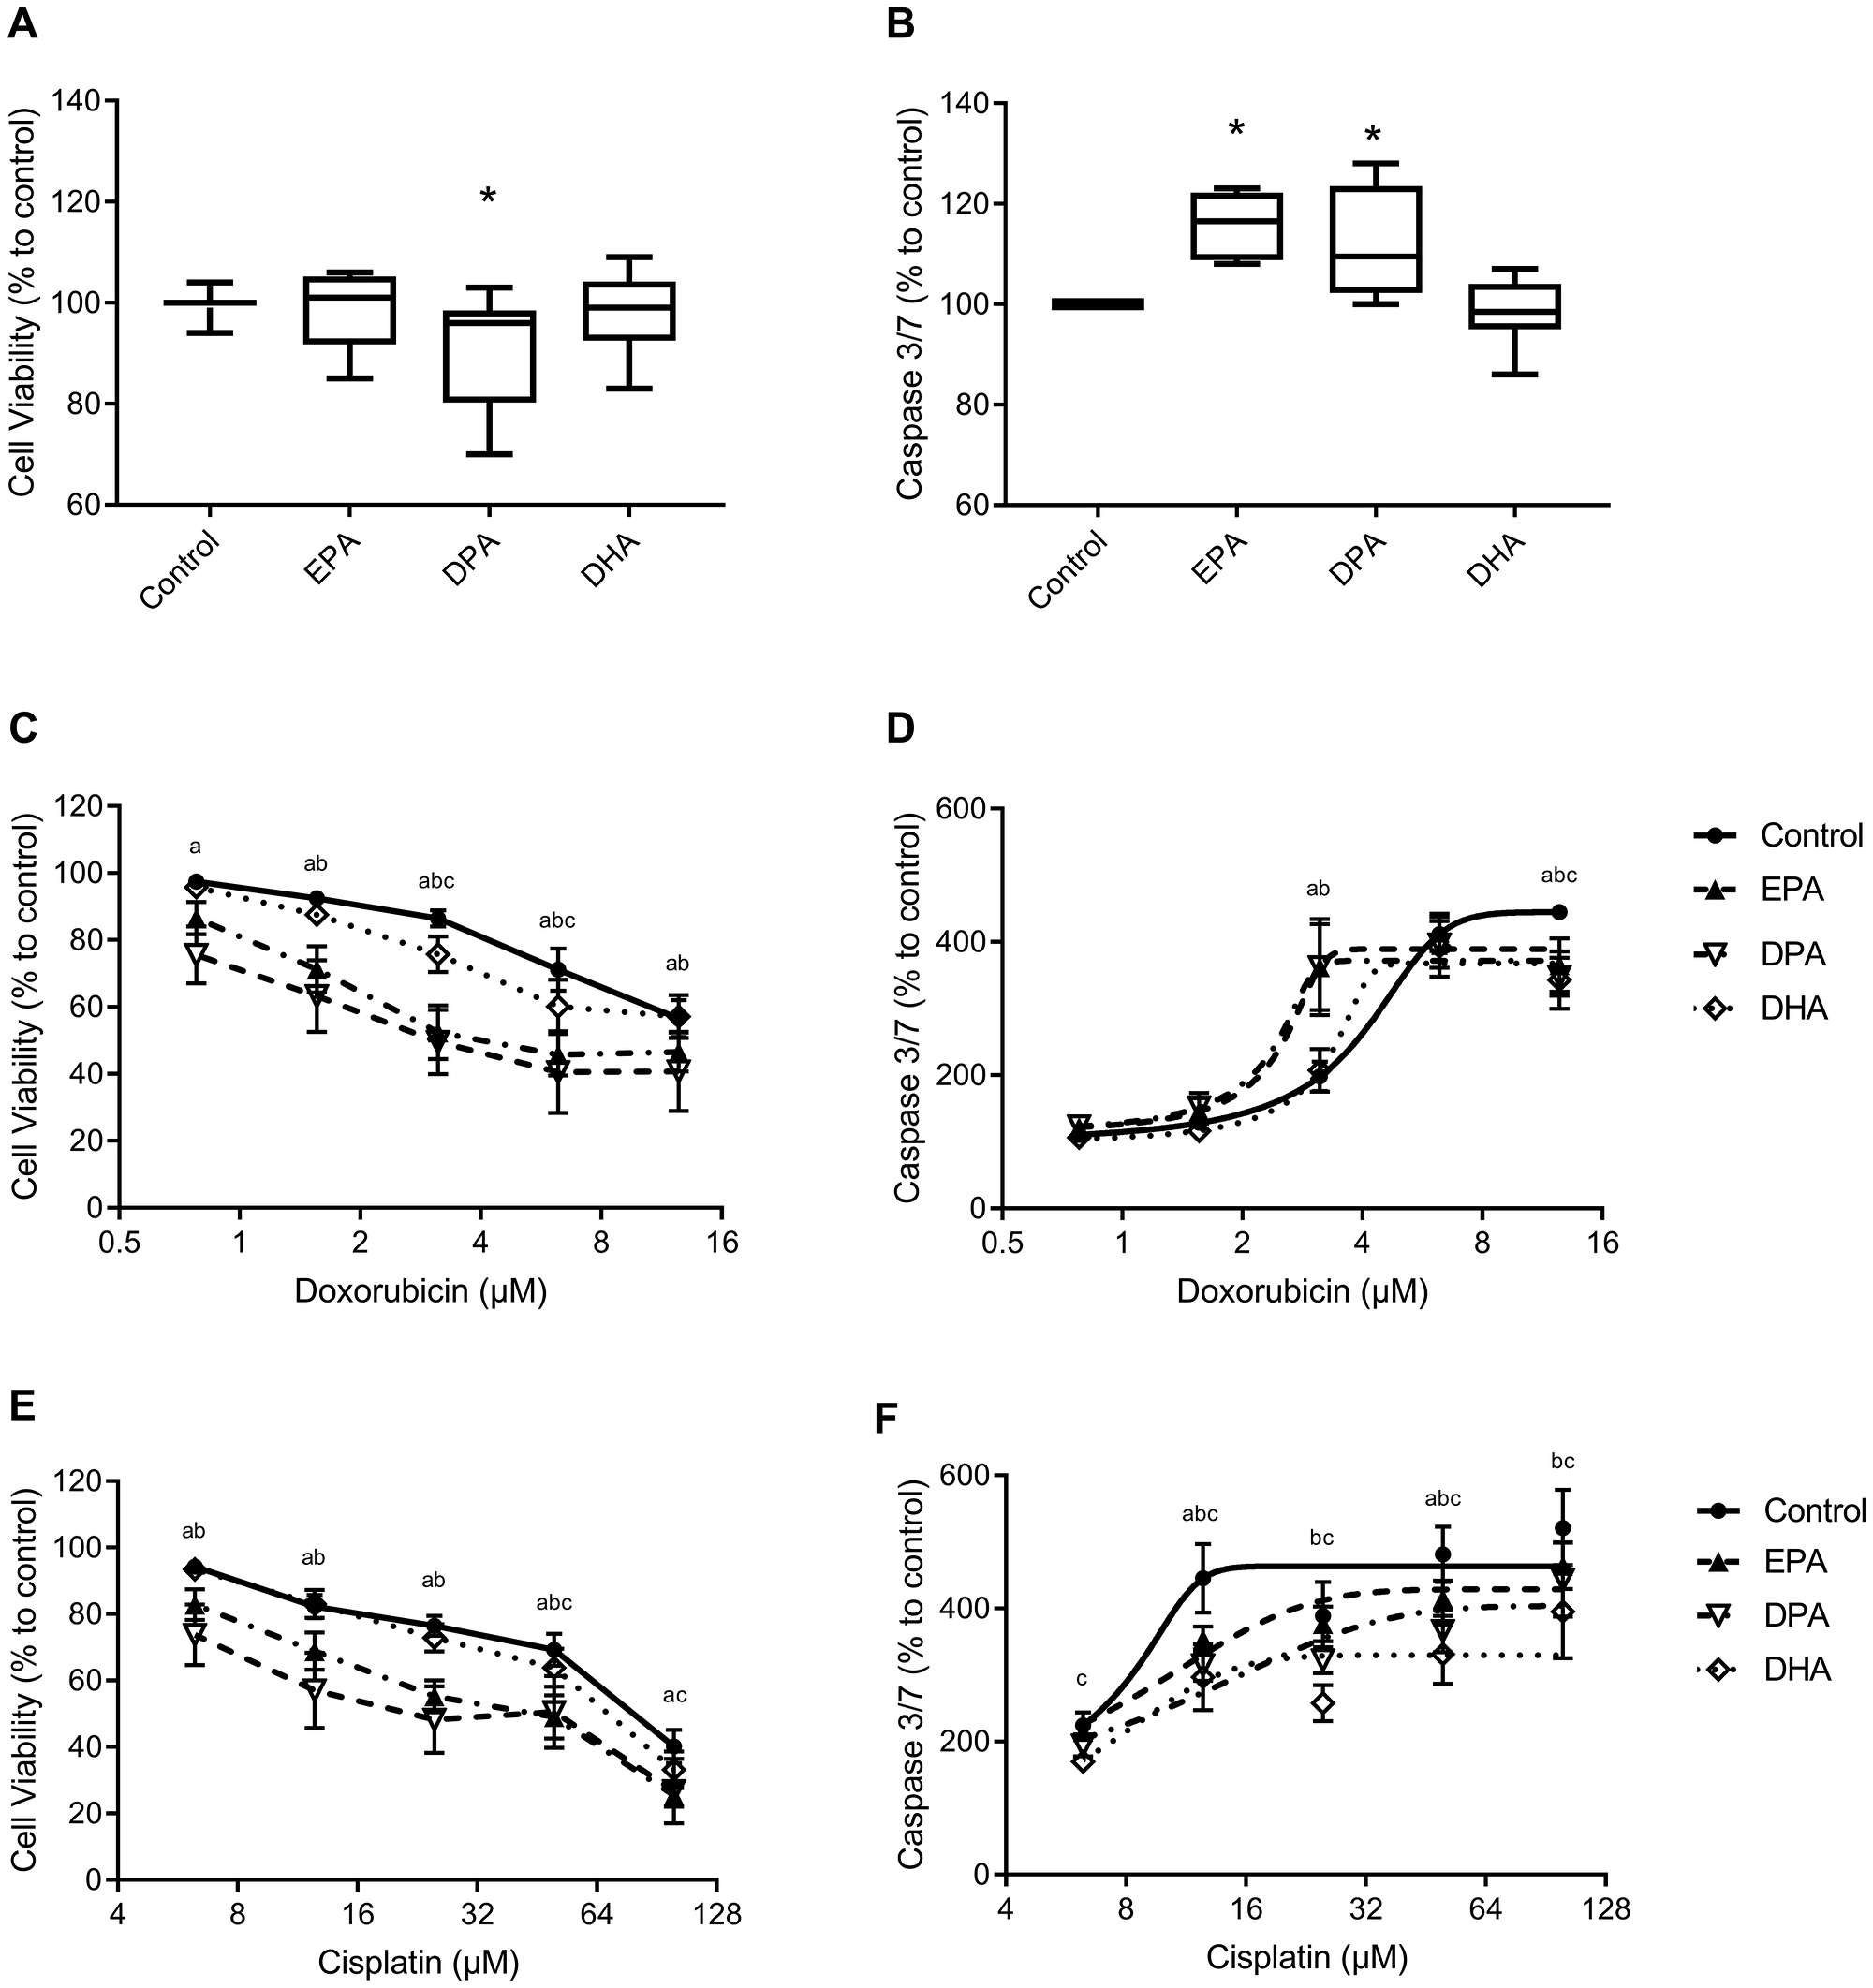 Cell viability and caspase 3/7 activity of C26 adenocarcinoma cells.